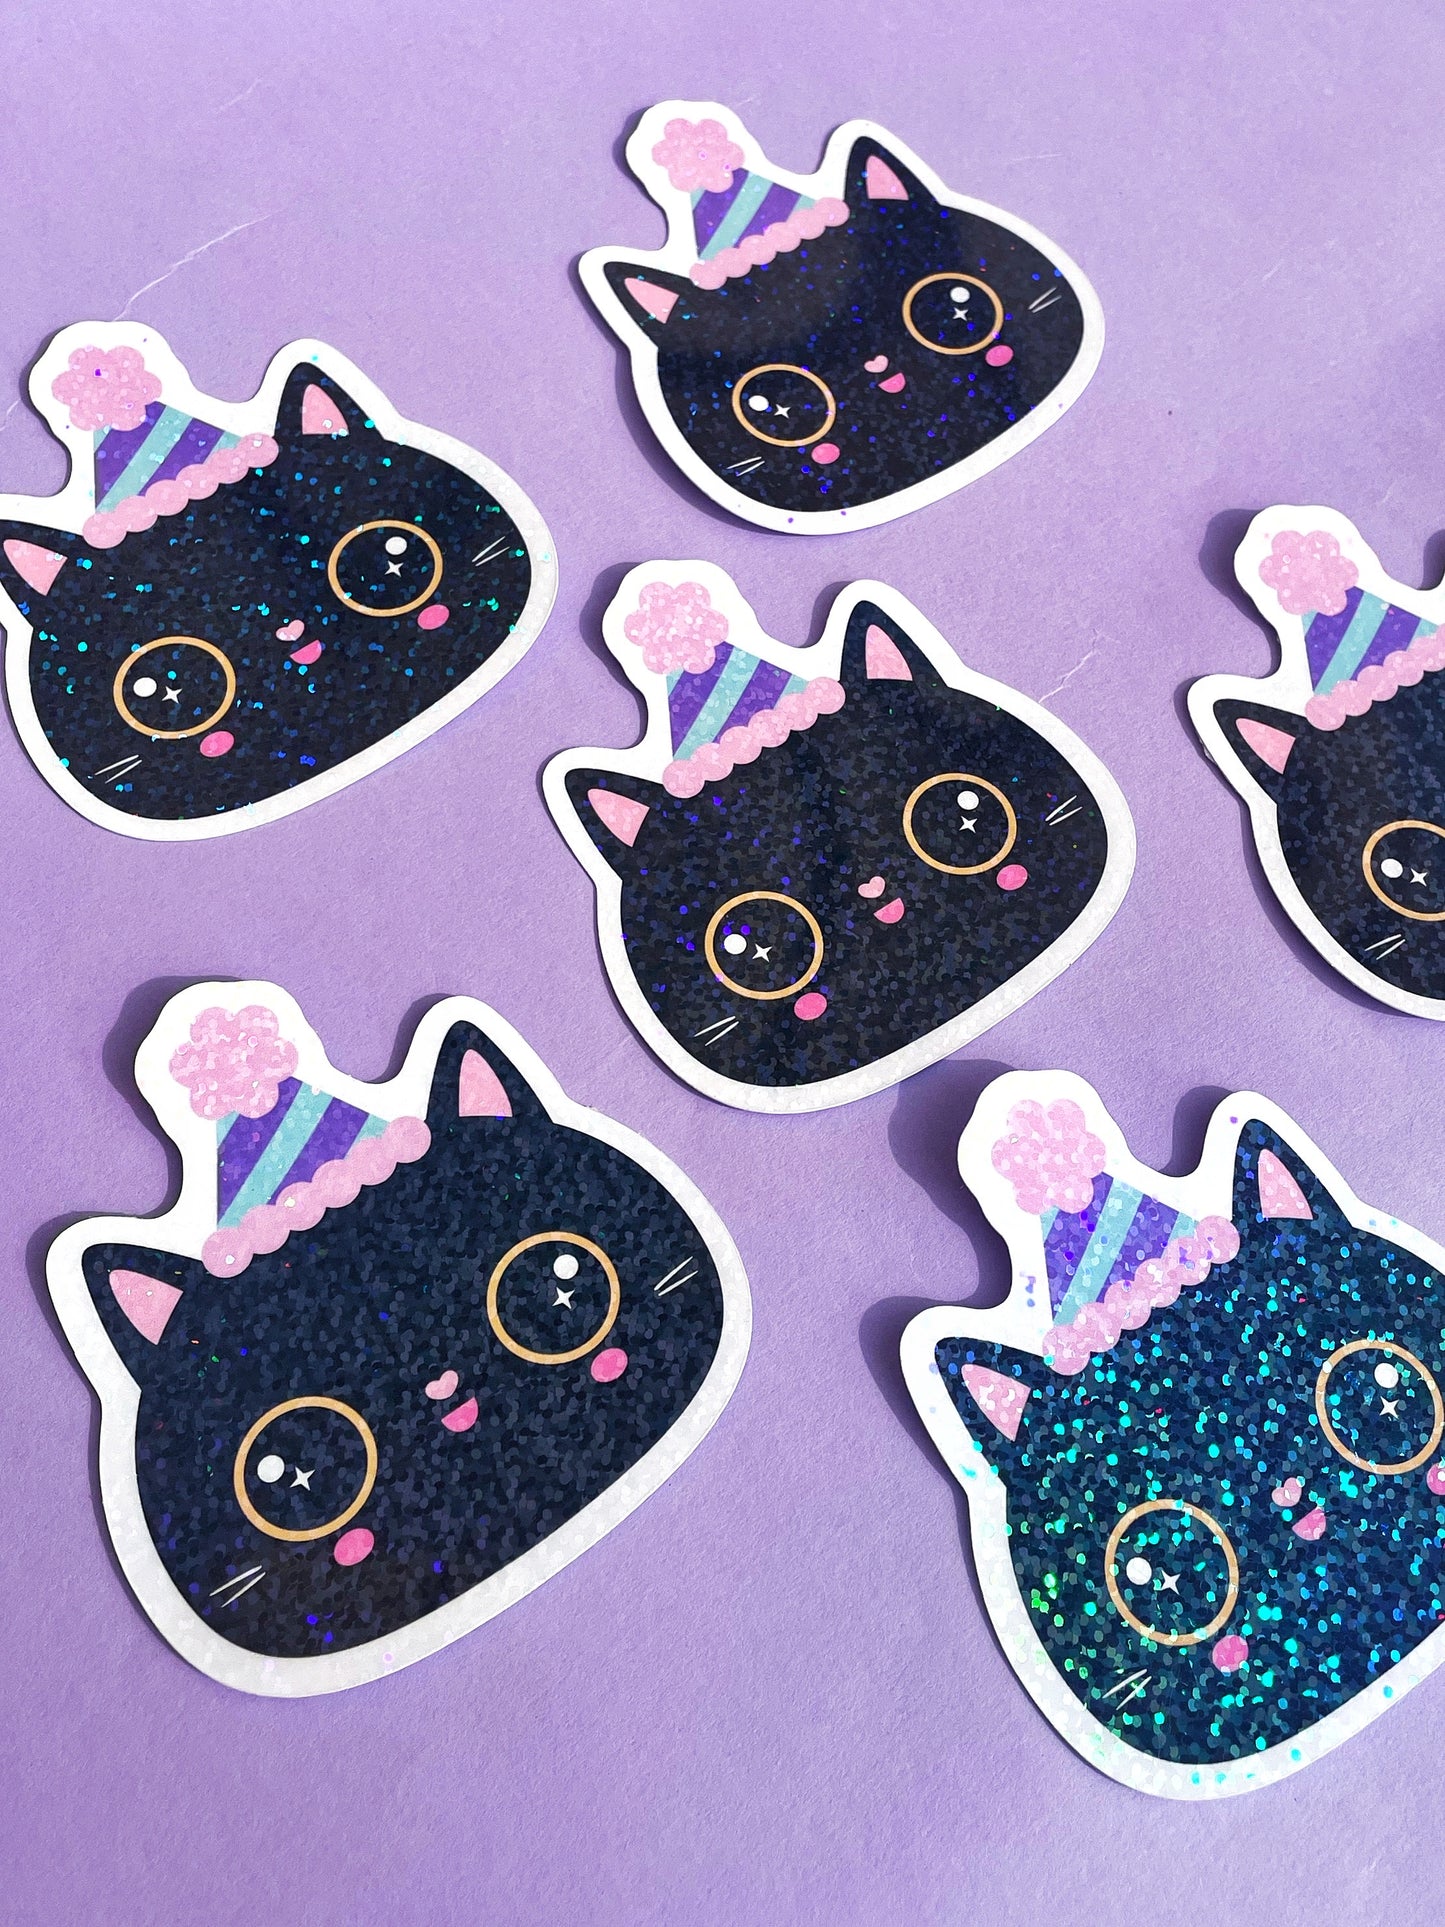 Party Cat sparkly holographic vinyl sticker